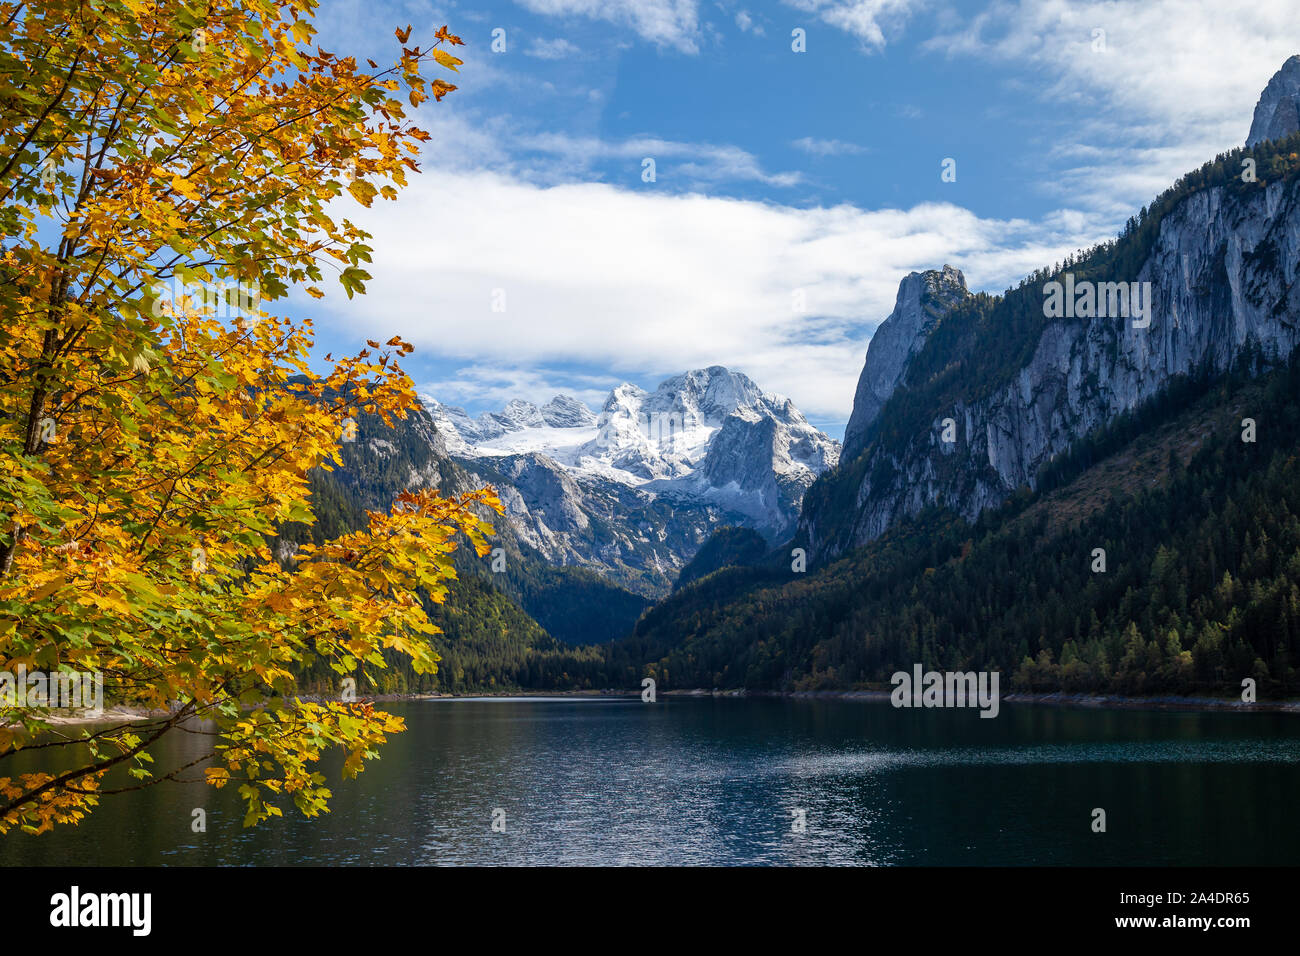 Mount Dachstein seen from famous Lake Gosau, Austria. A colorfull autumn spectacle is ongoing in the alps with a yellow, orange maple tree nicely illu Stock Photo